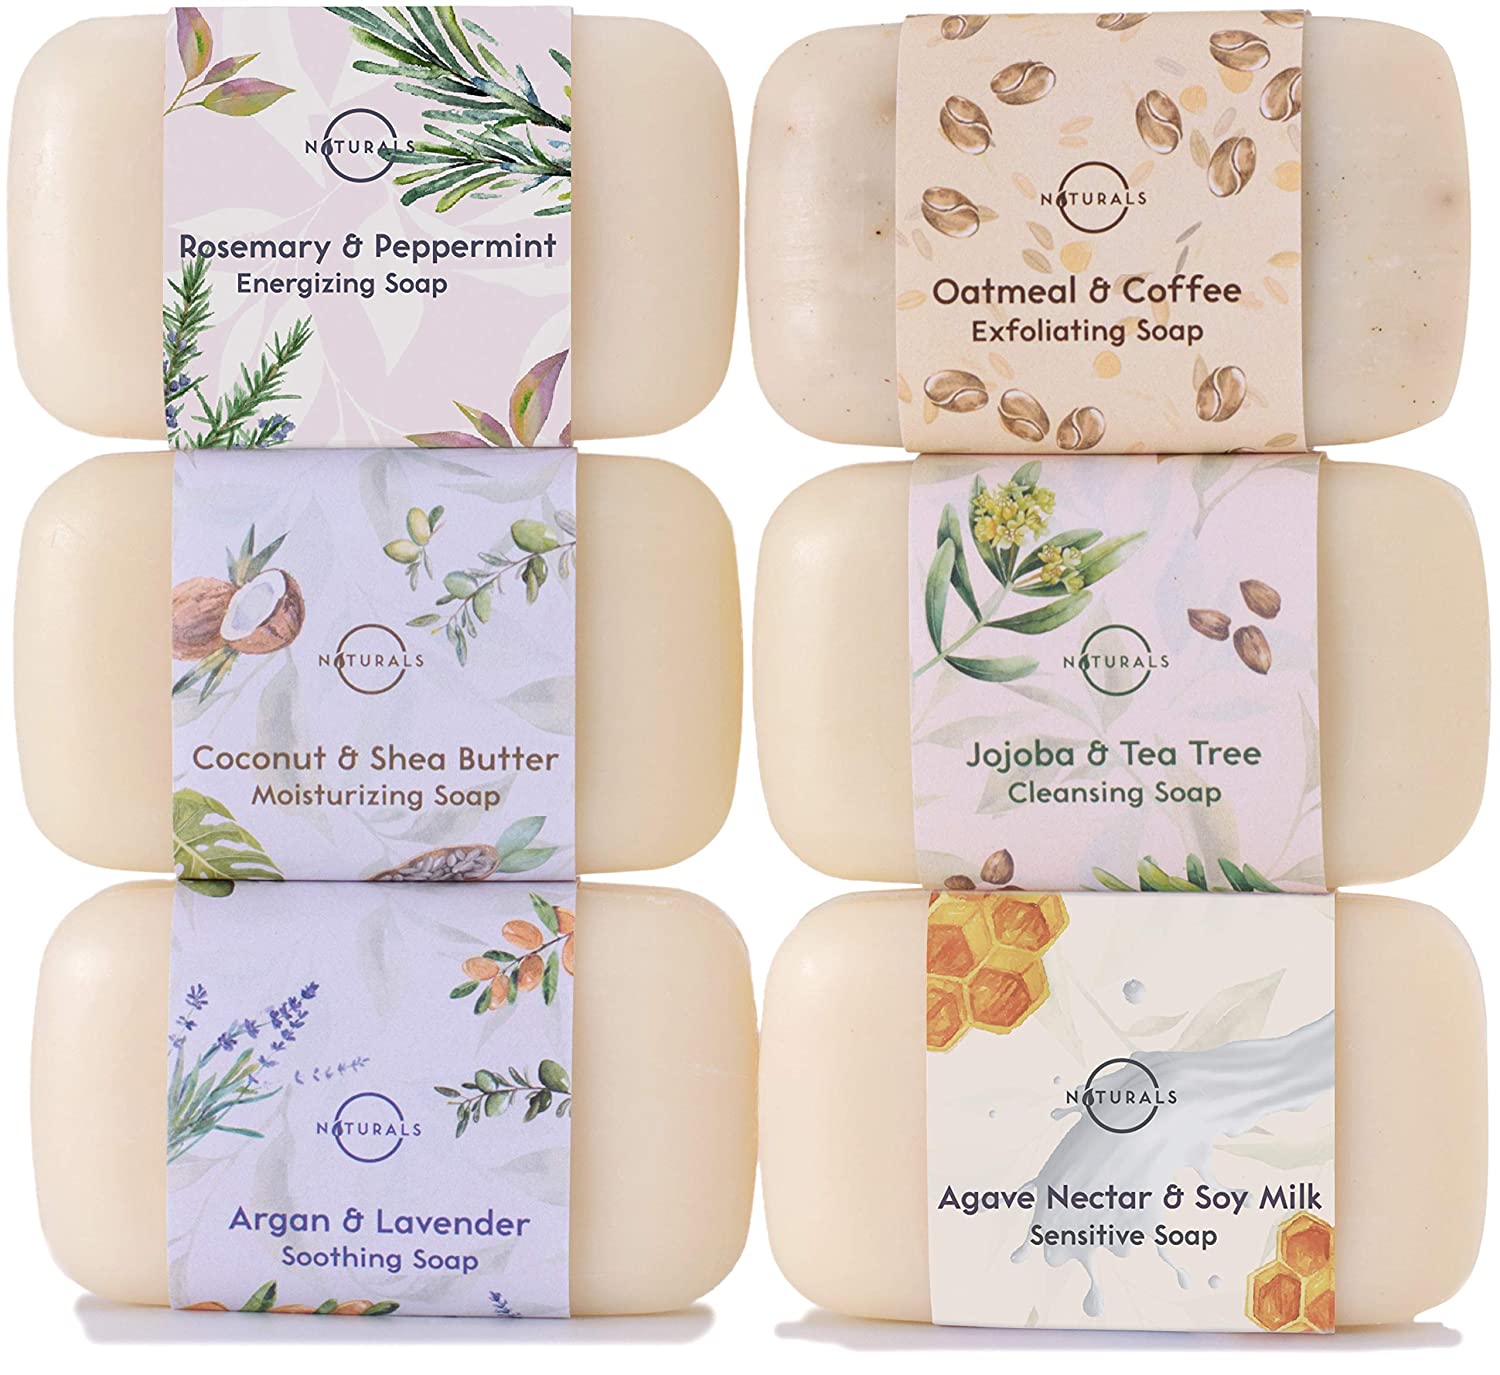 O Naturals organic bar soaps hep fight Coronavirus and other germs.